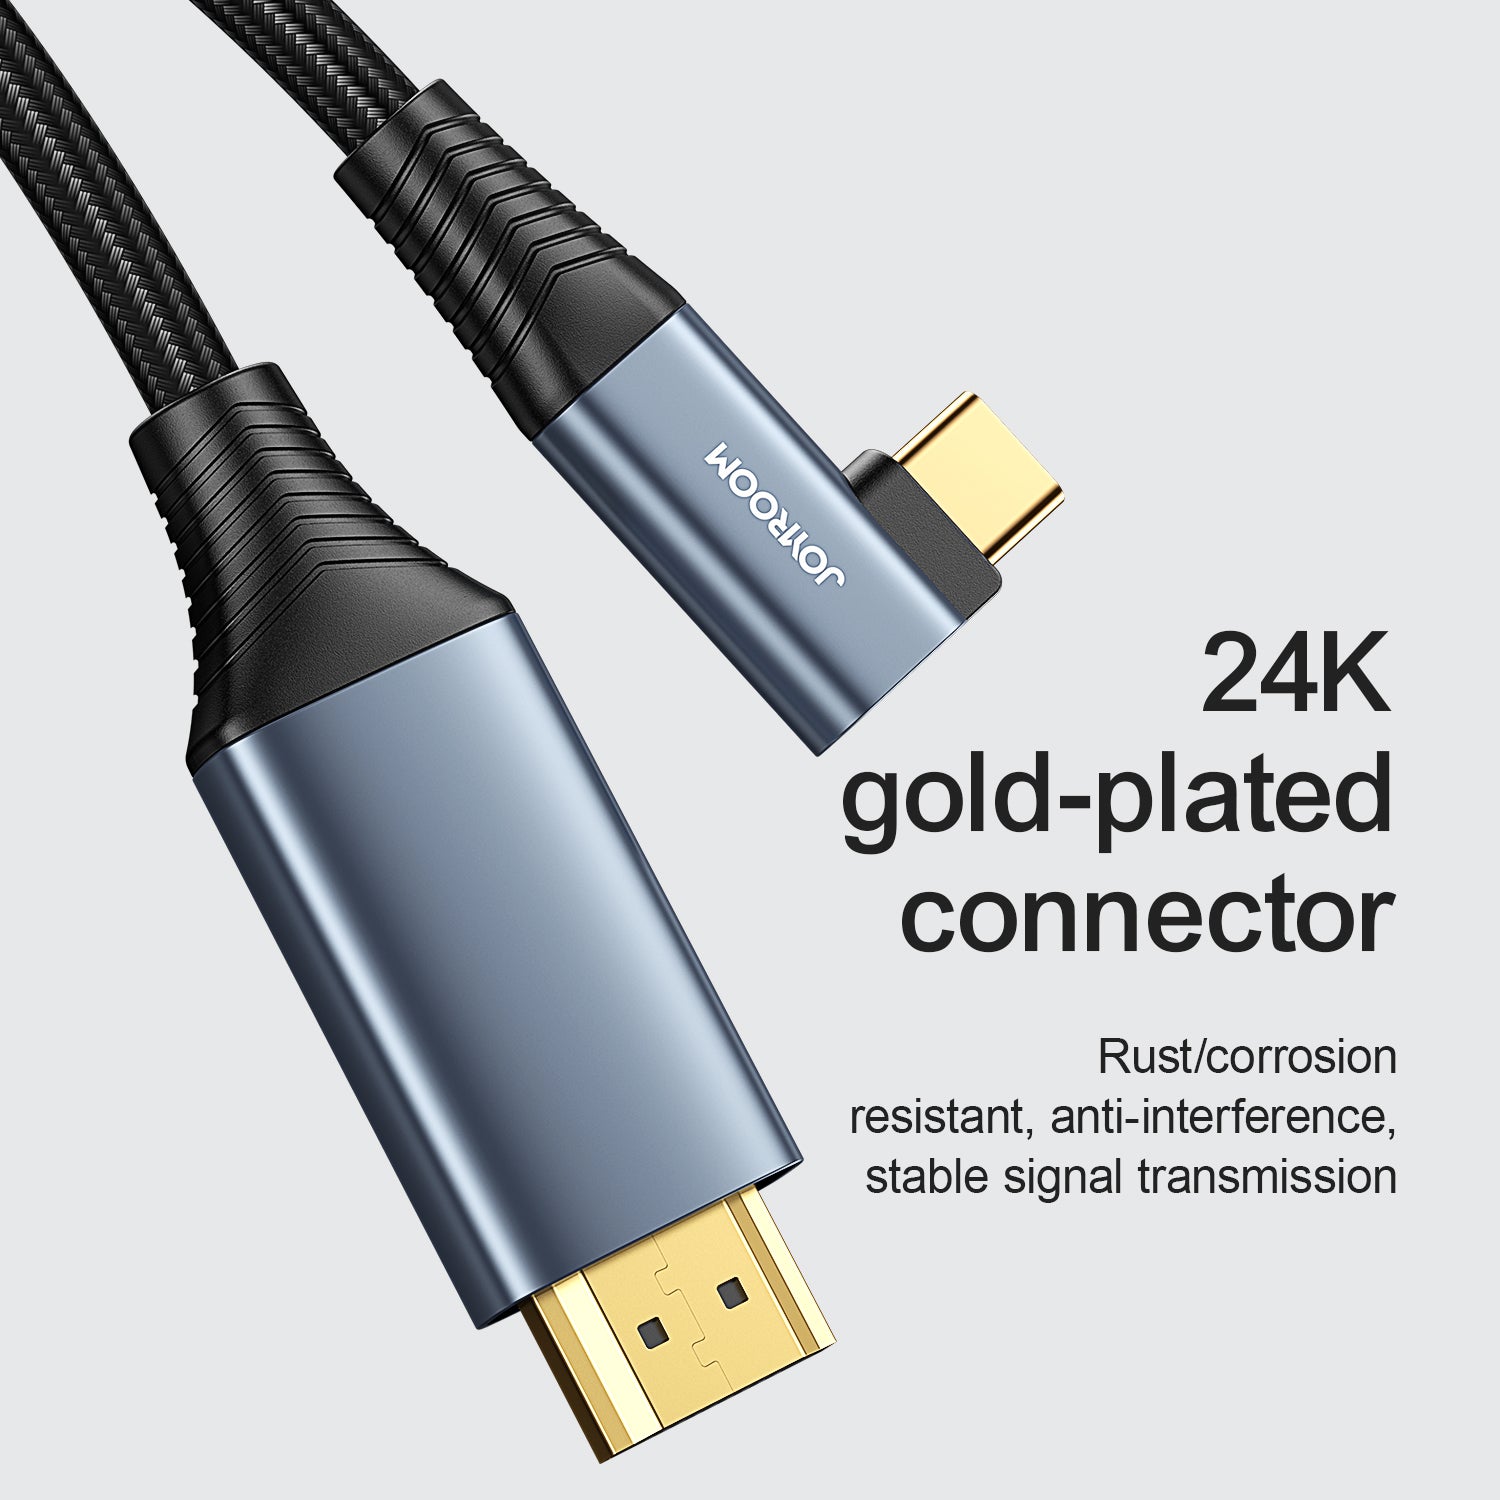 Type-C to HDMI 4K Cable 2m